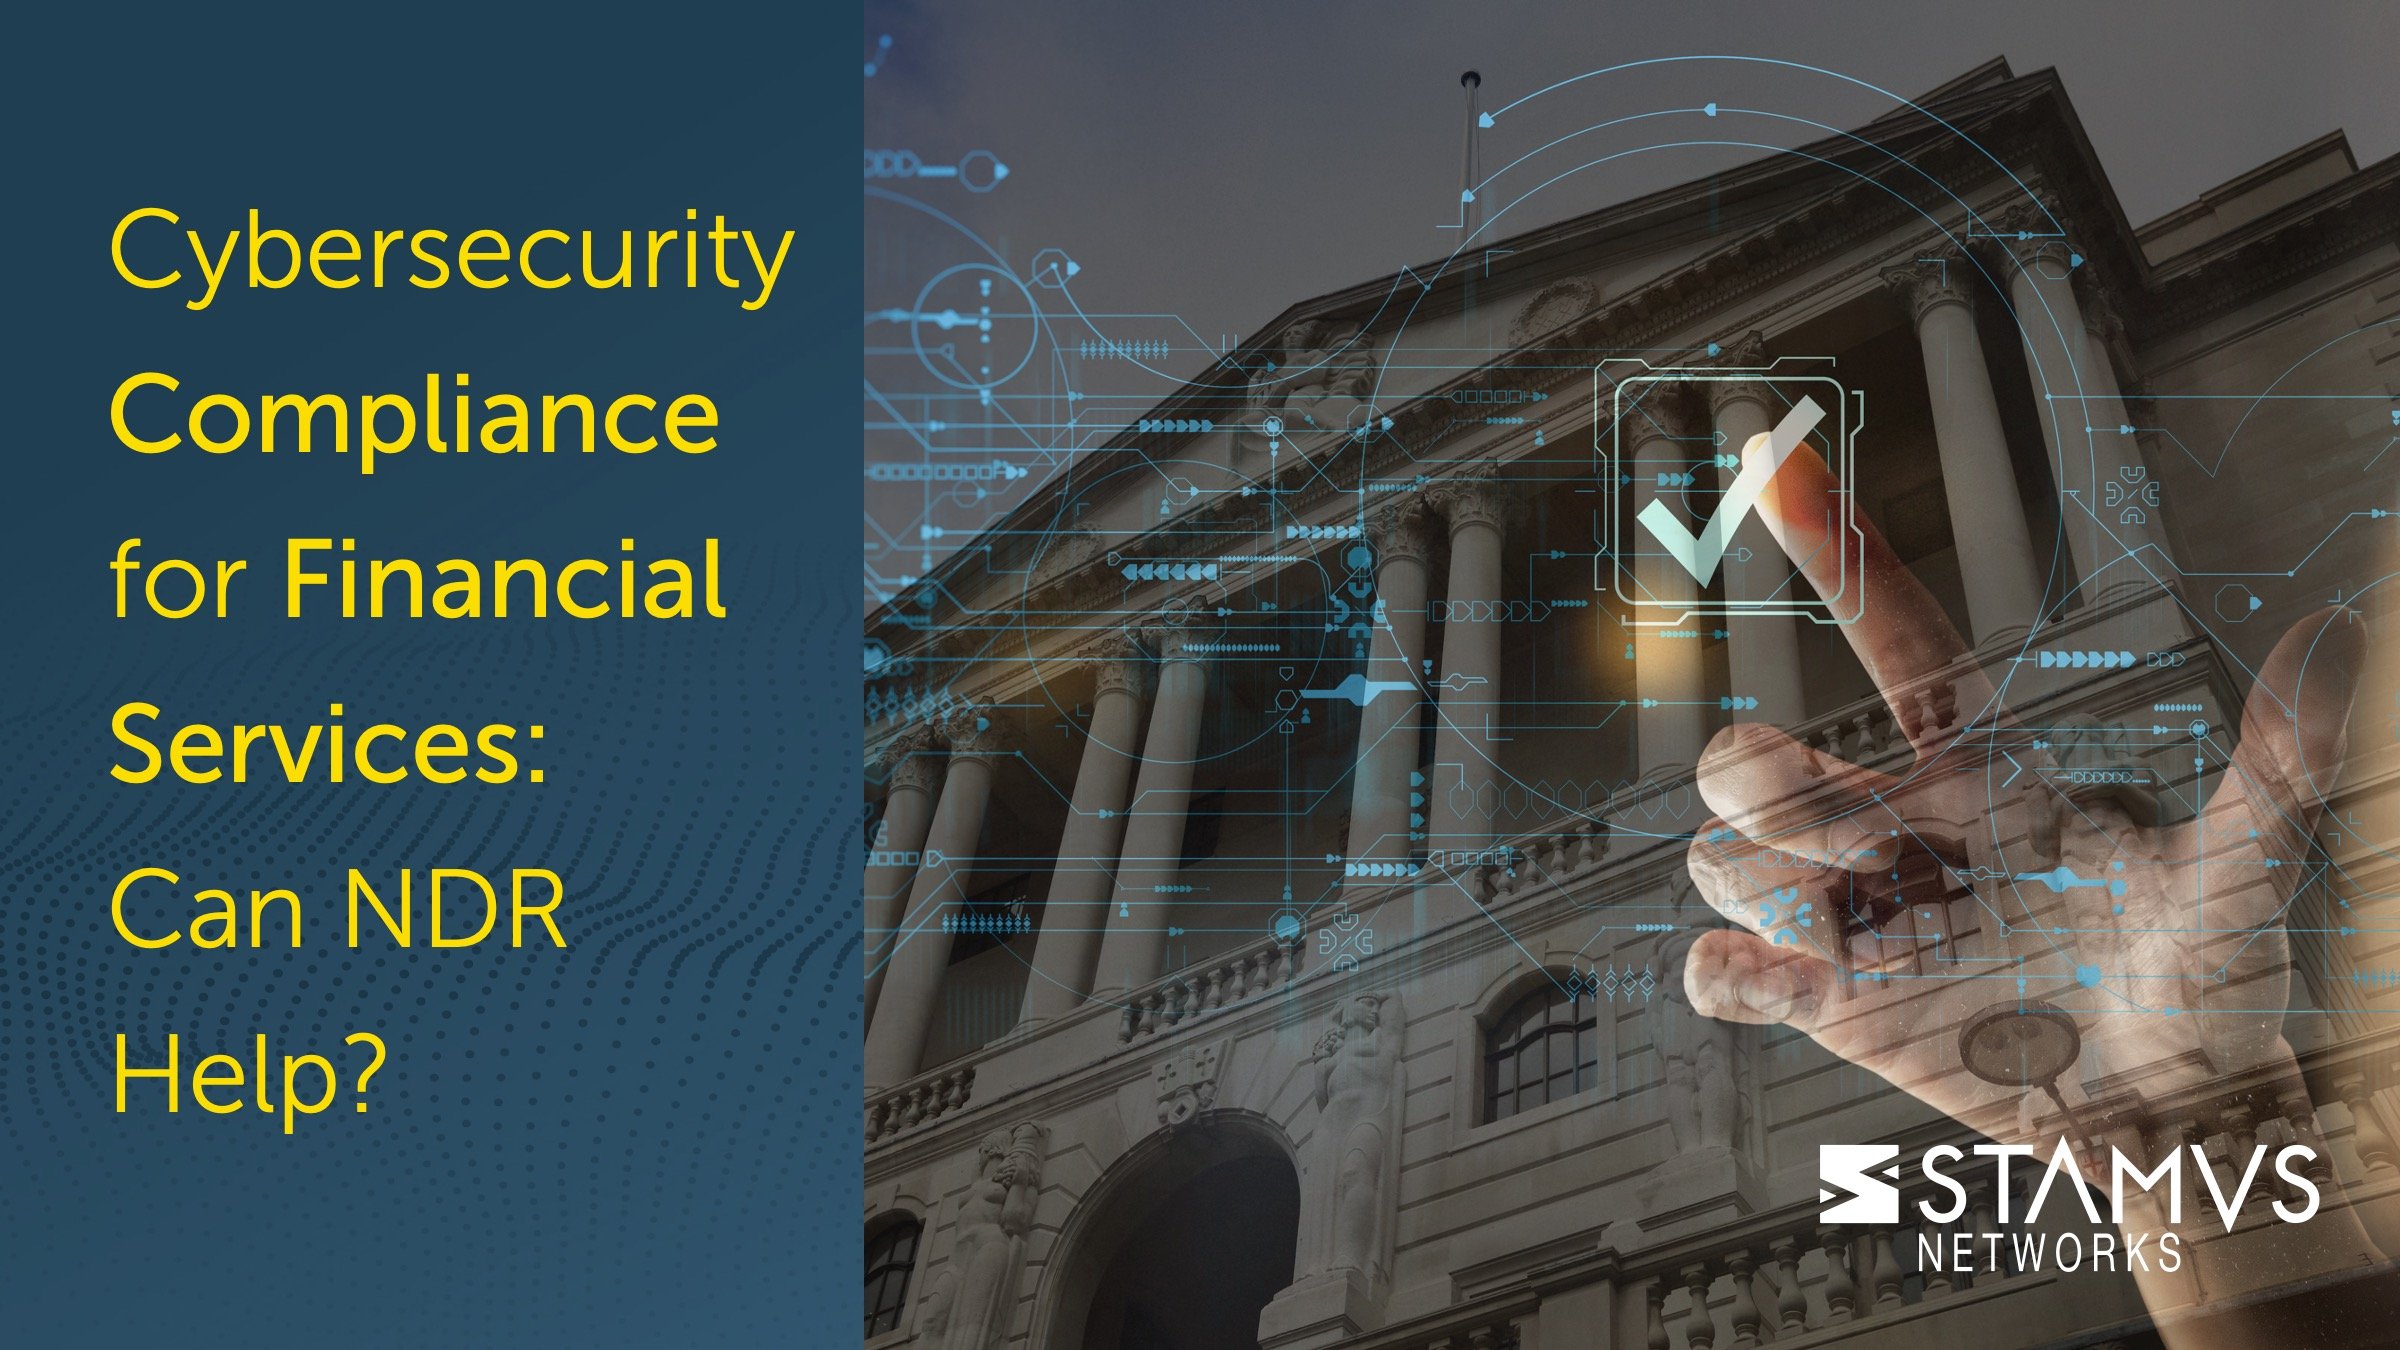 Cybersecurity Compliance for Financial Services: Can NDR Help by Stamus Networks Team